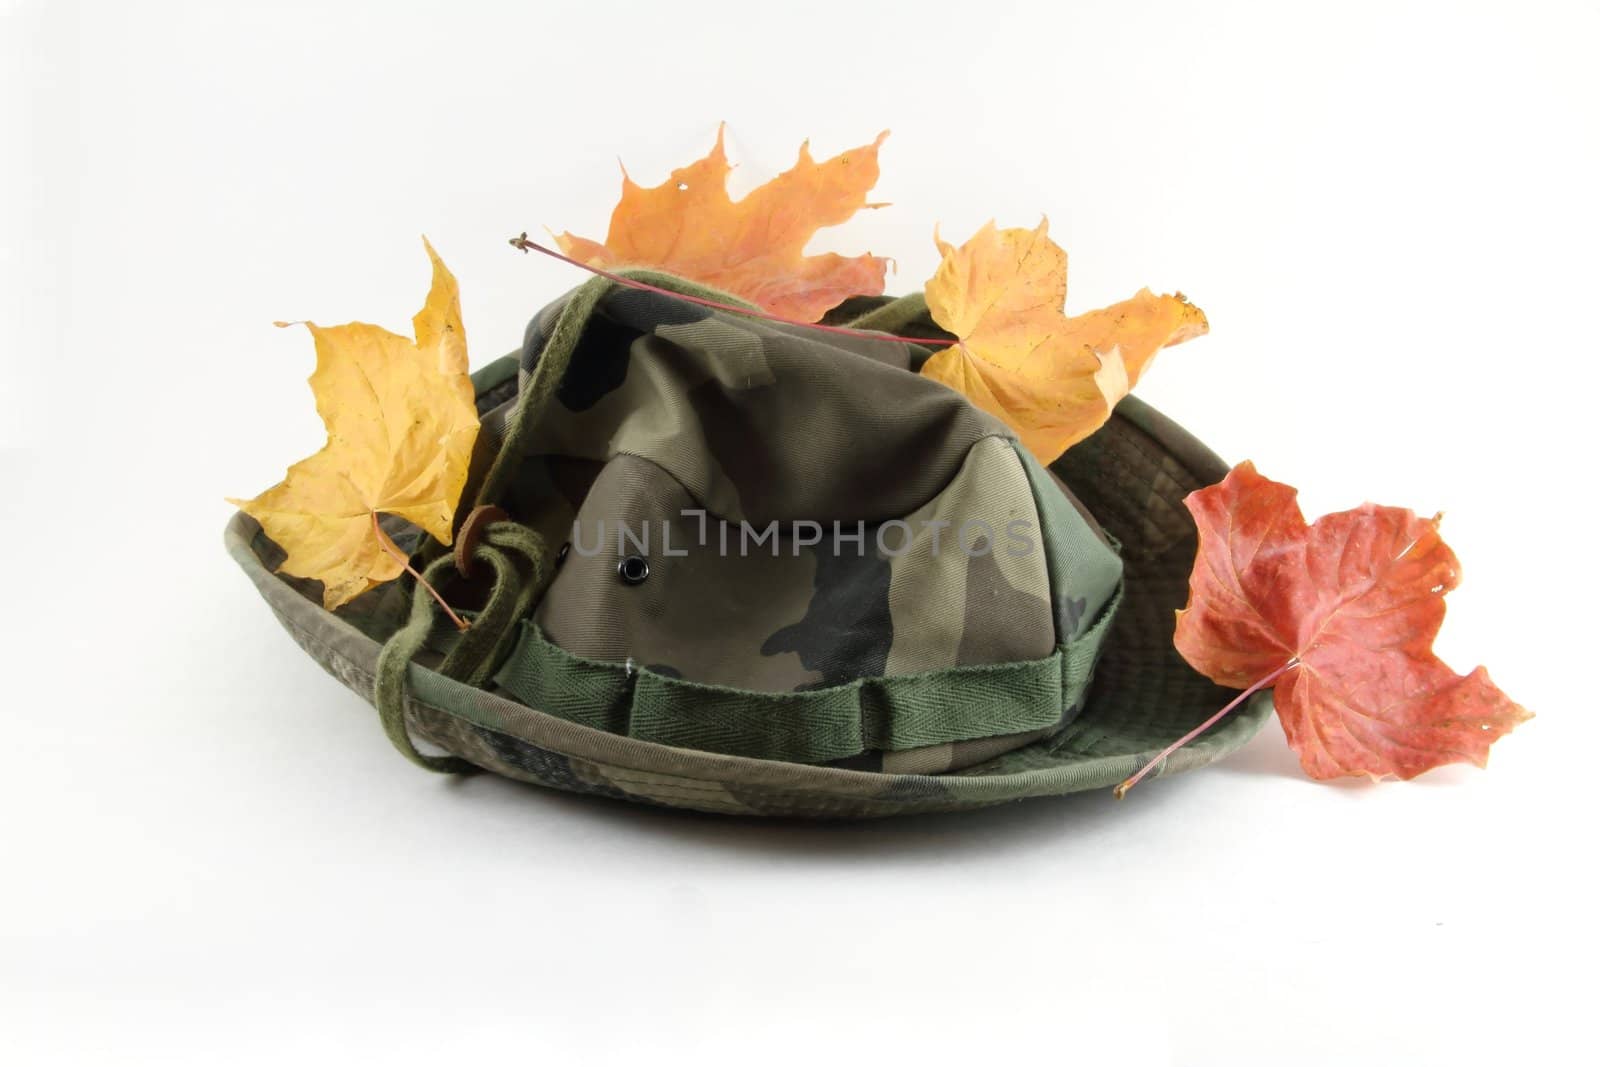 A camouflage hat, isolated on white with leaves.